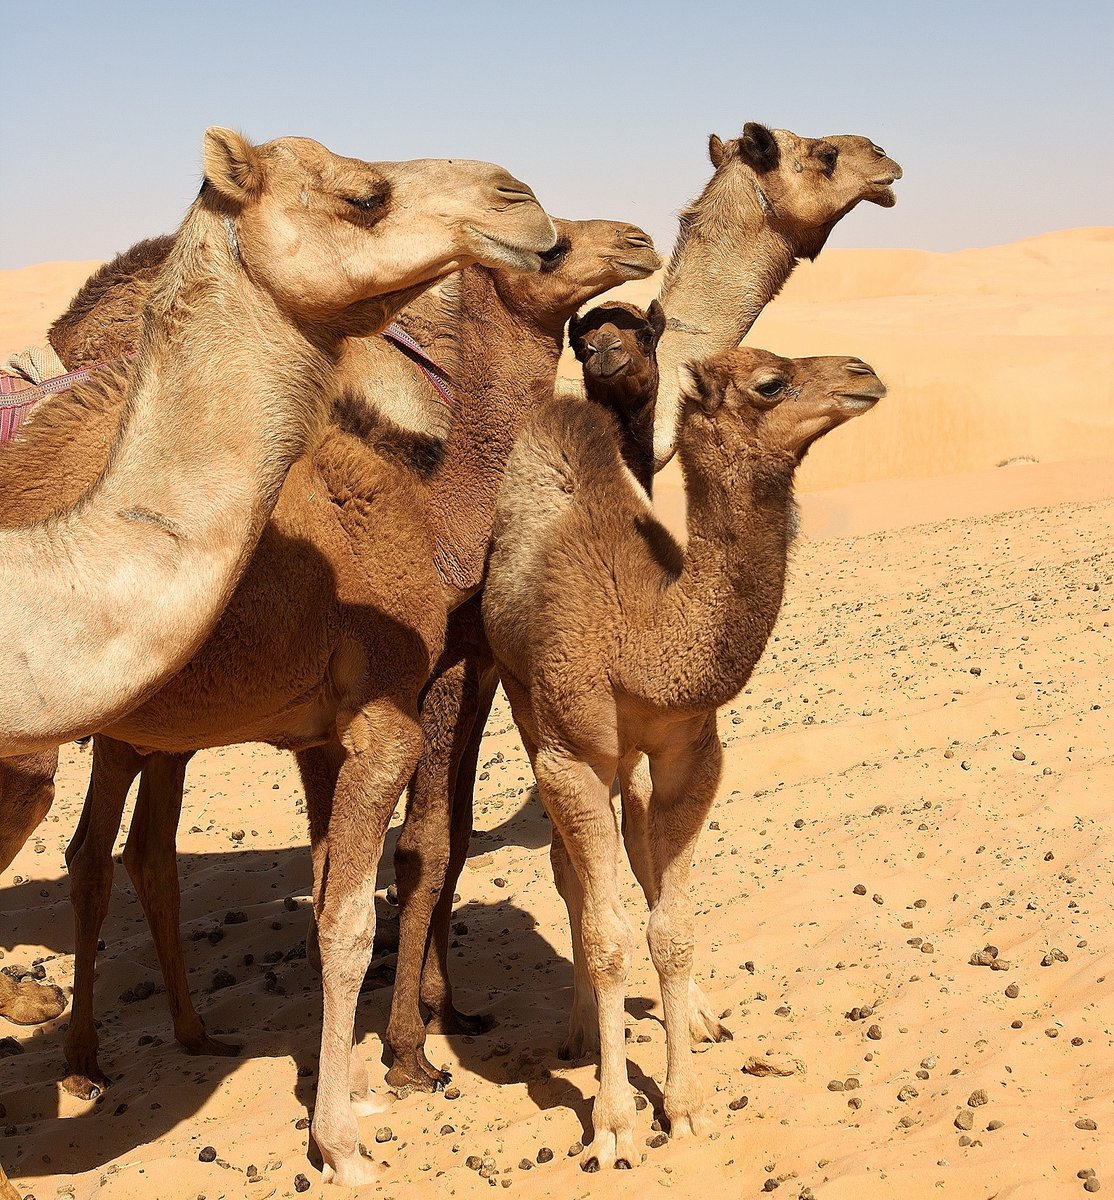 Beauty of the camels